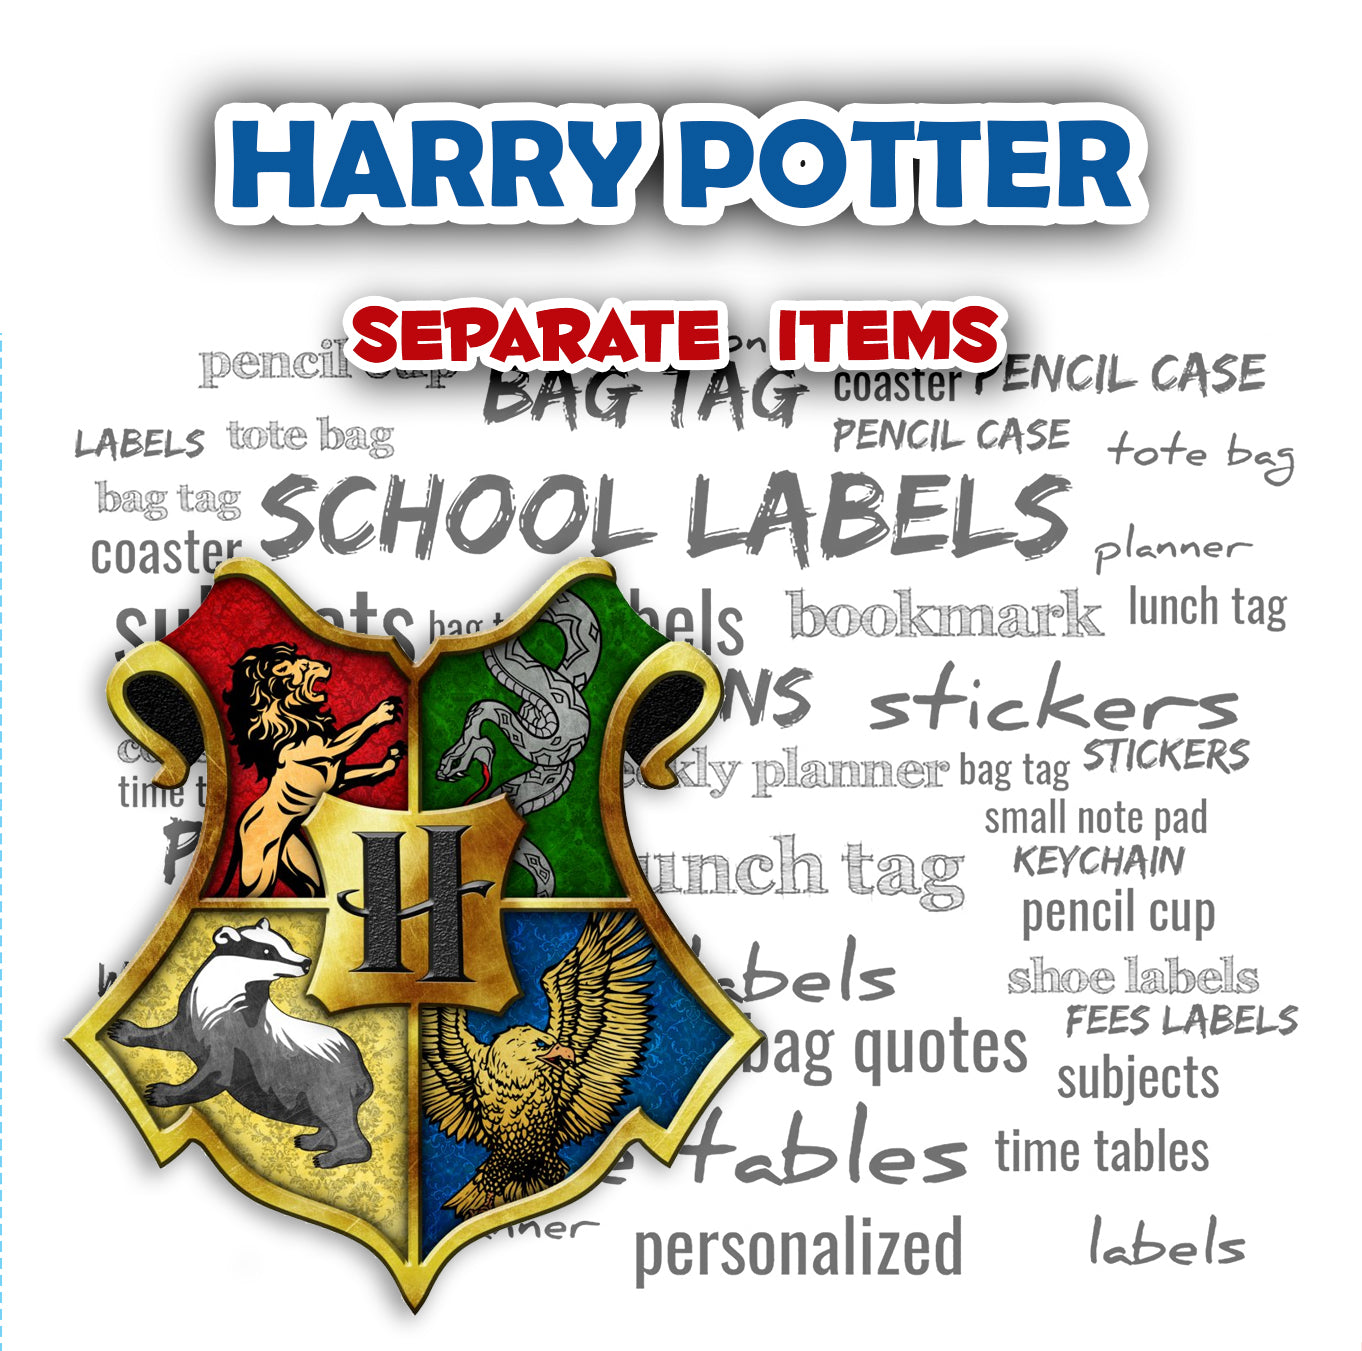 ""Harry Potter" Separate items